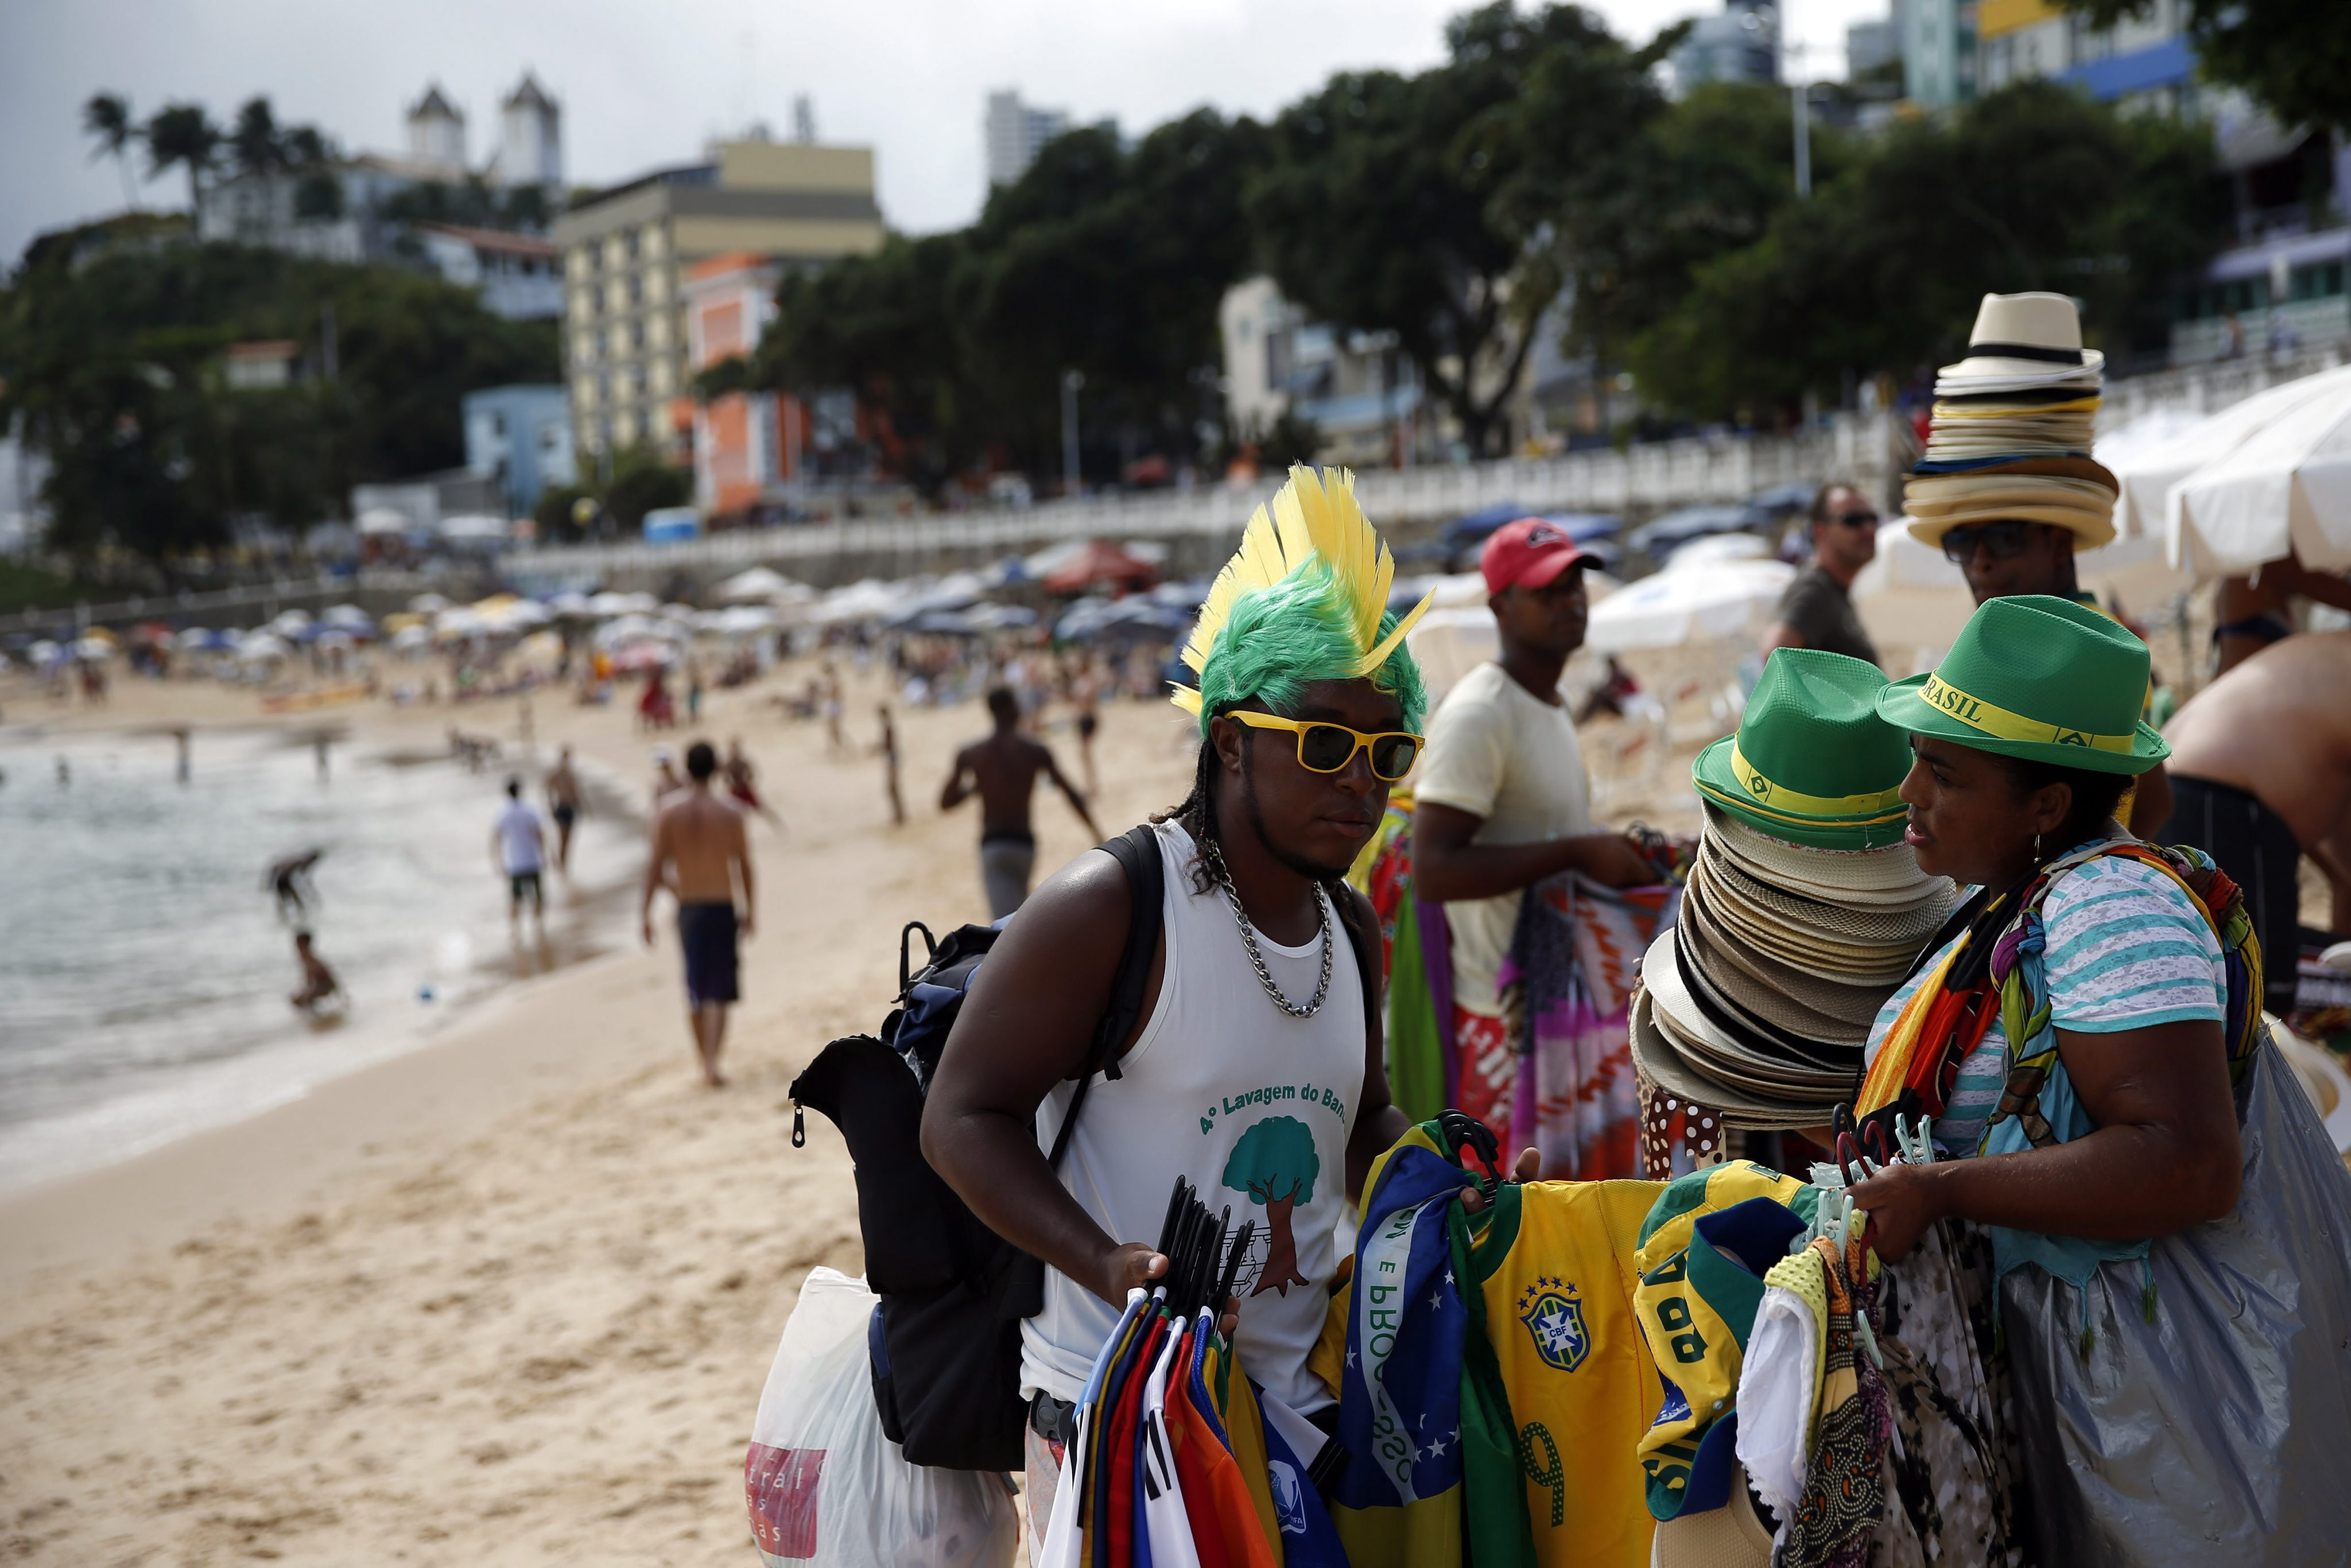 Bahia, in Salvador, is renowned for its beaches. Photo: EPA